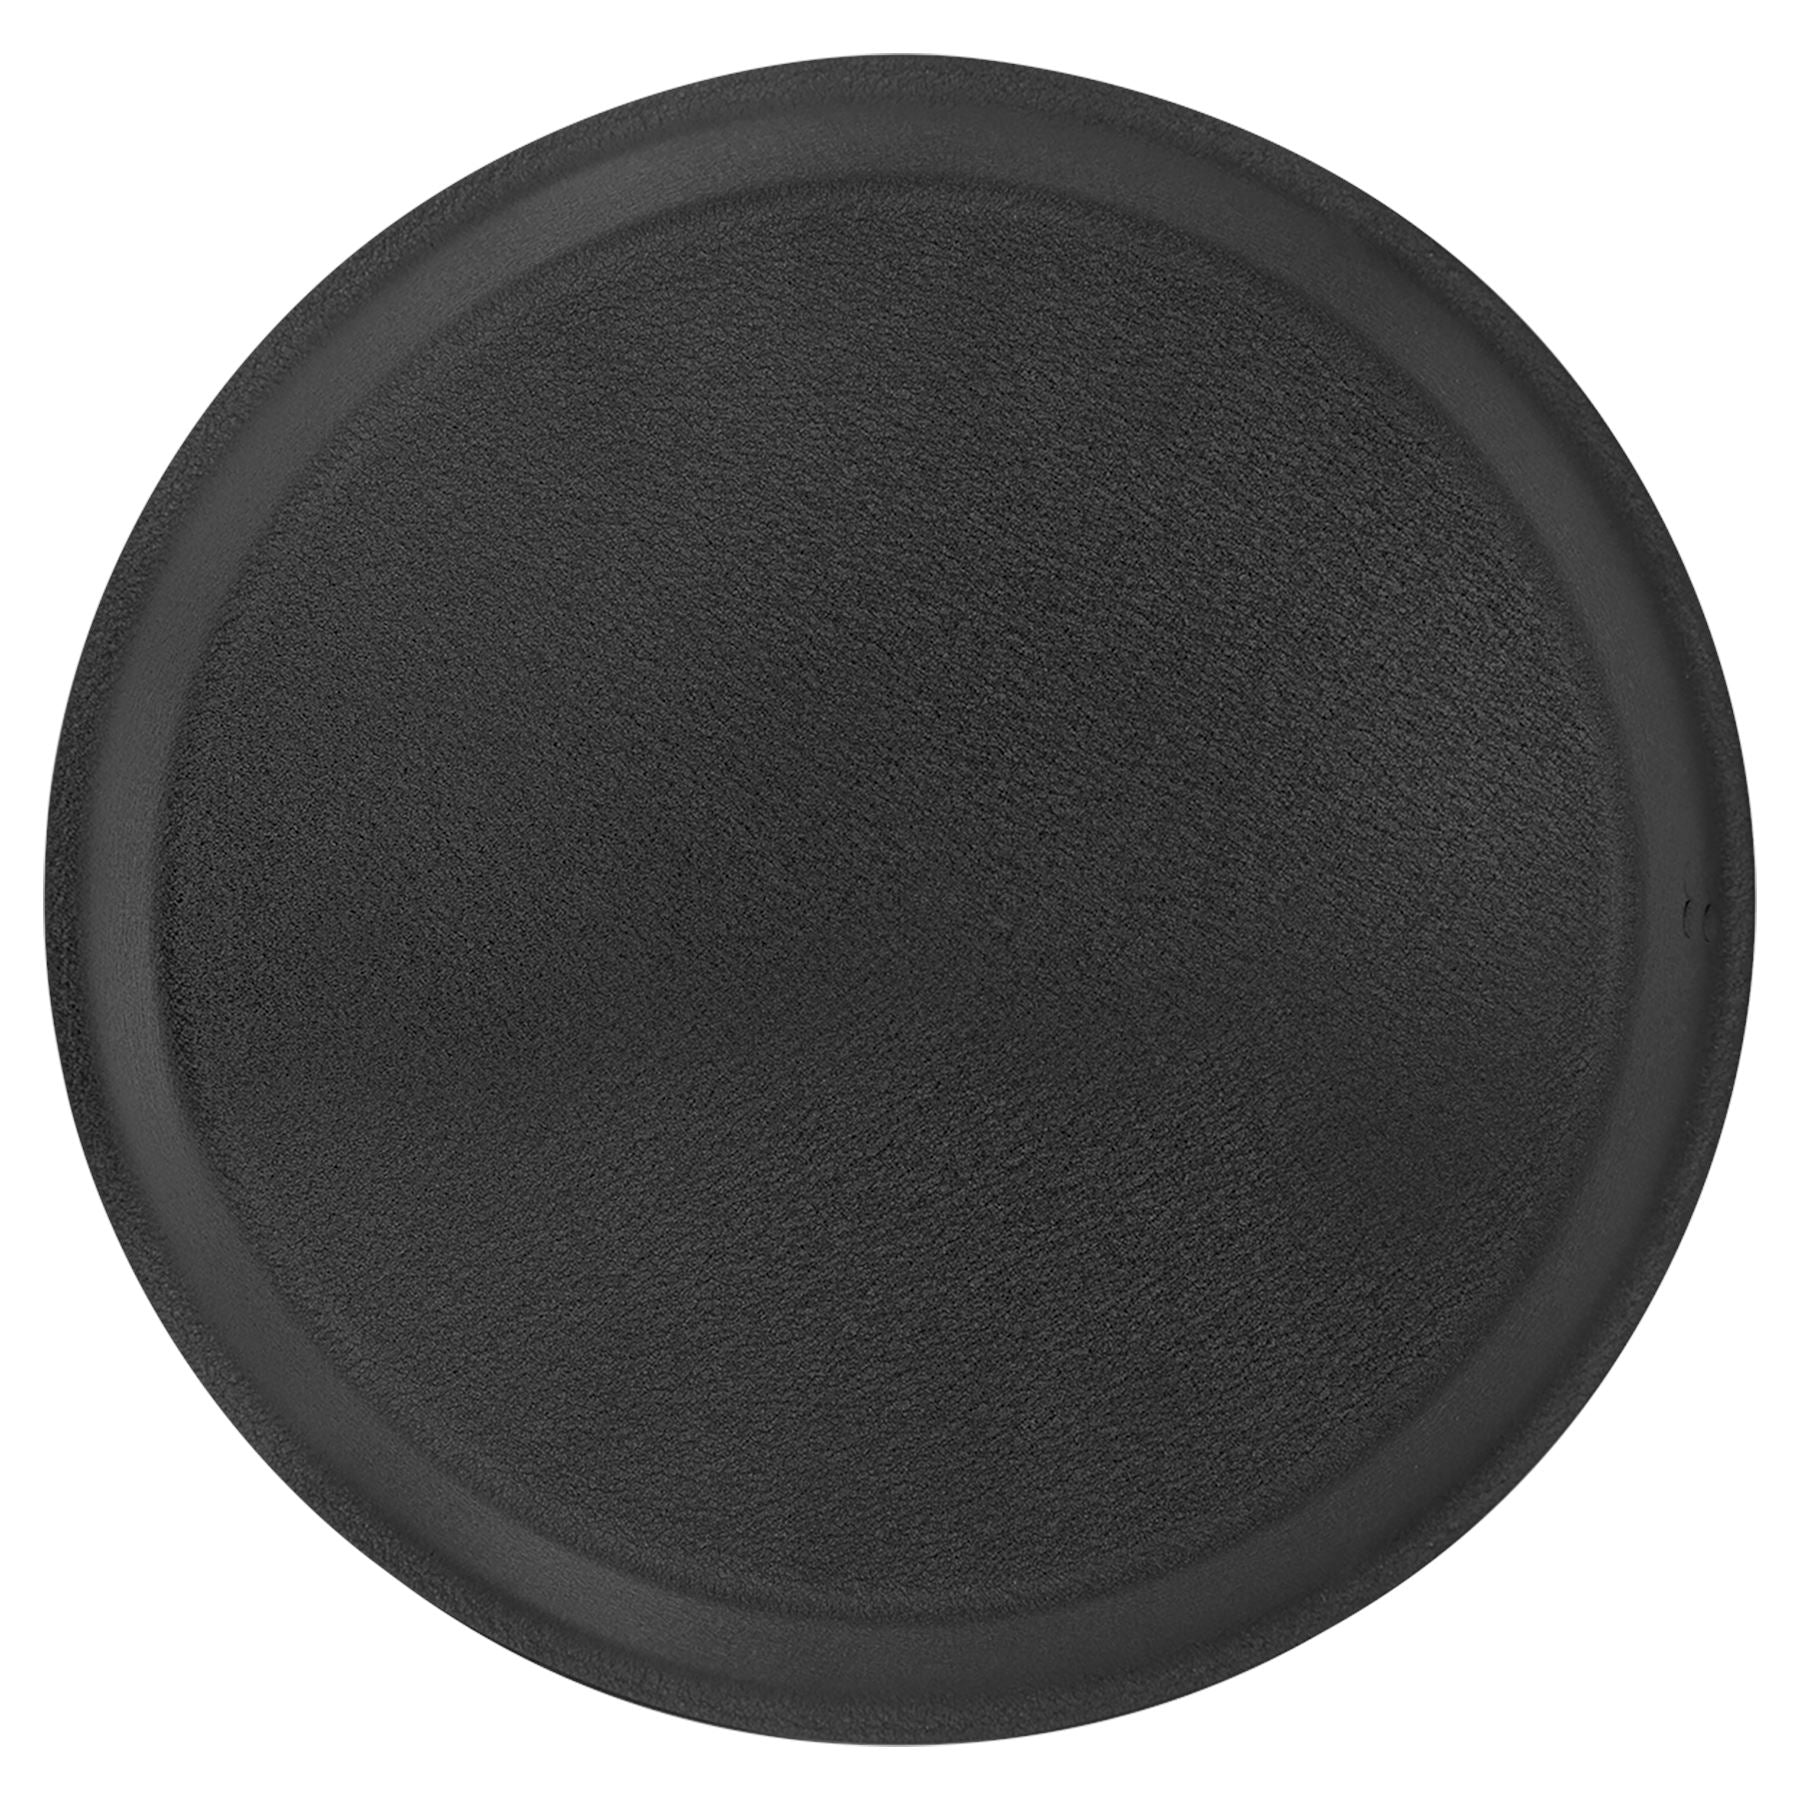 9" Aluminum Pie Pan w/Lid, Laser Engraved Cake Pan Craftworks NW Replacement Lid Only Black Small